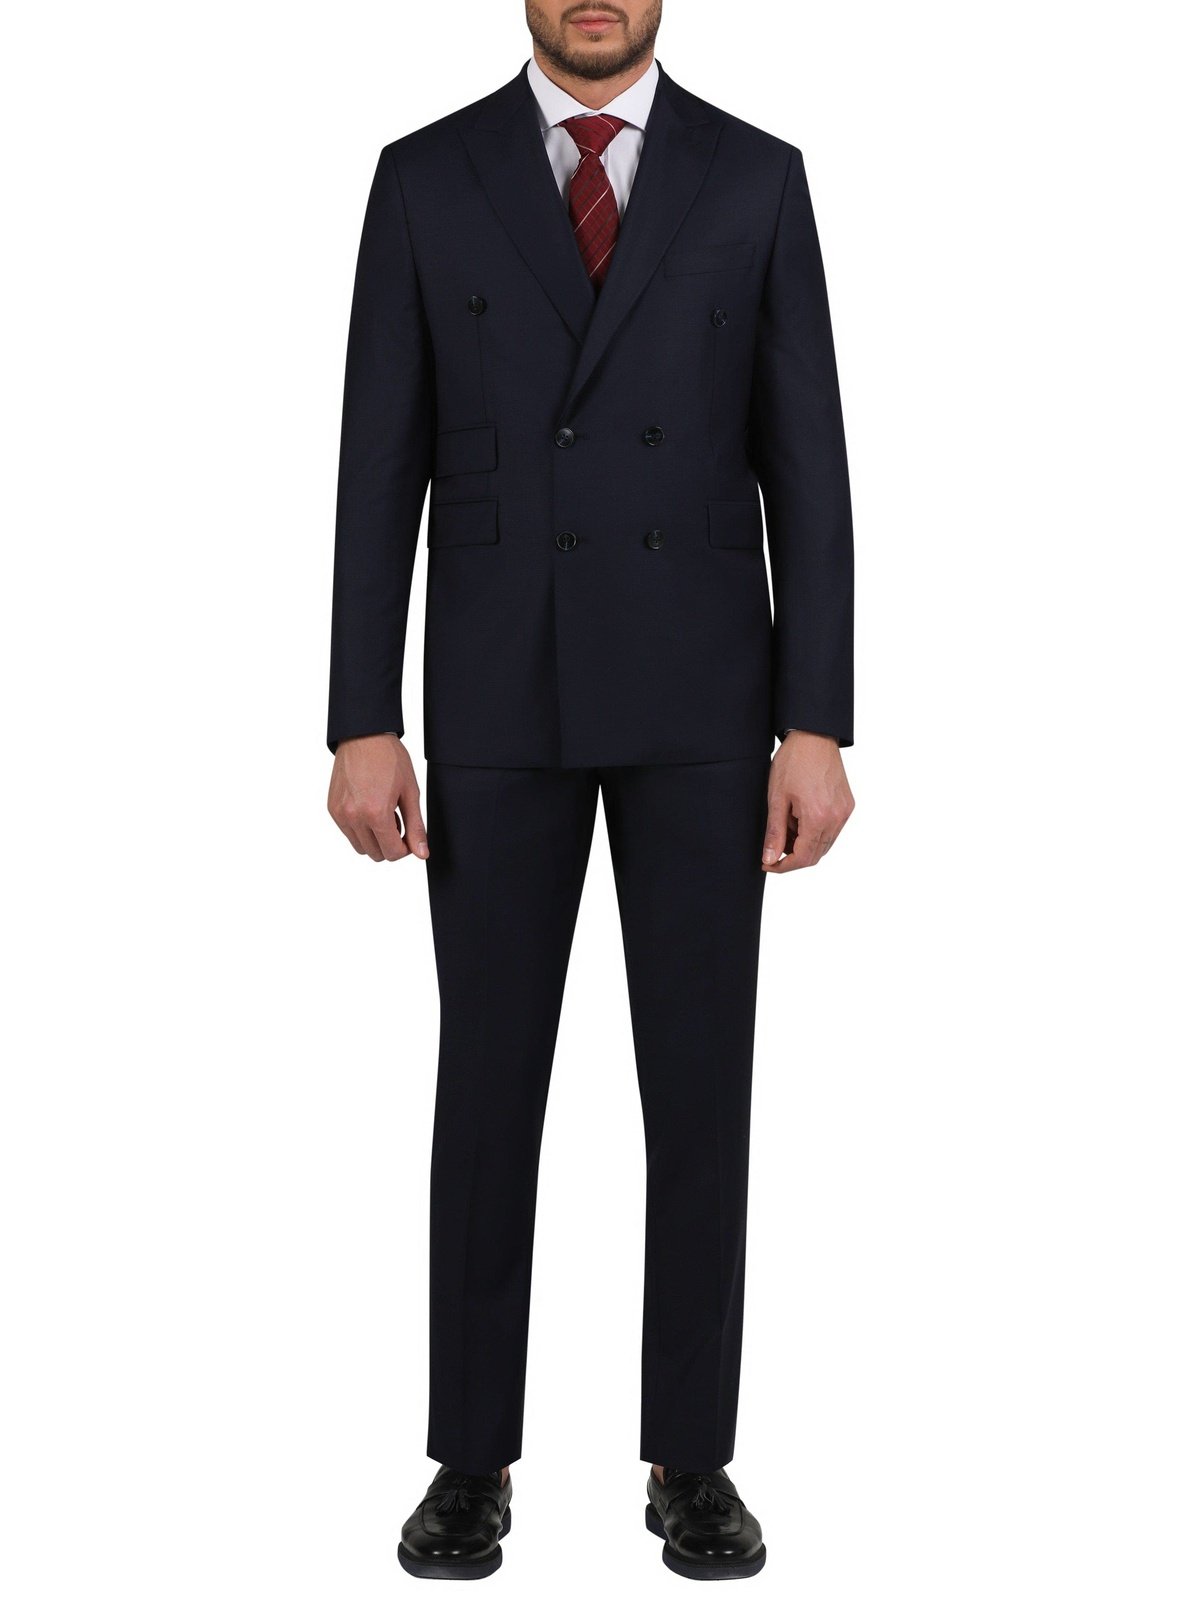 Di'nucci SUITS 38R Di'nucci Navy Textured Double Breasted Wool Suit